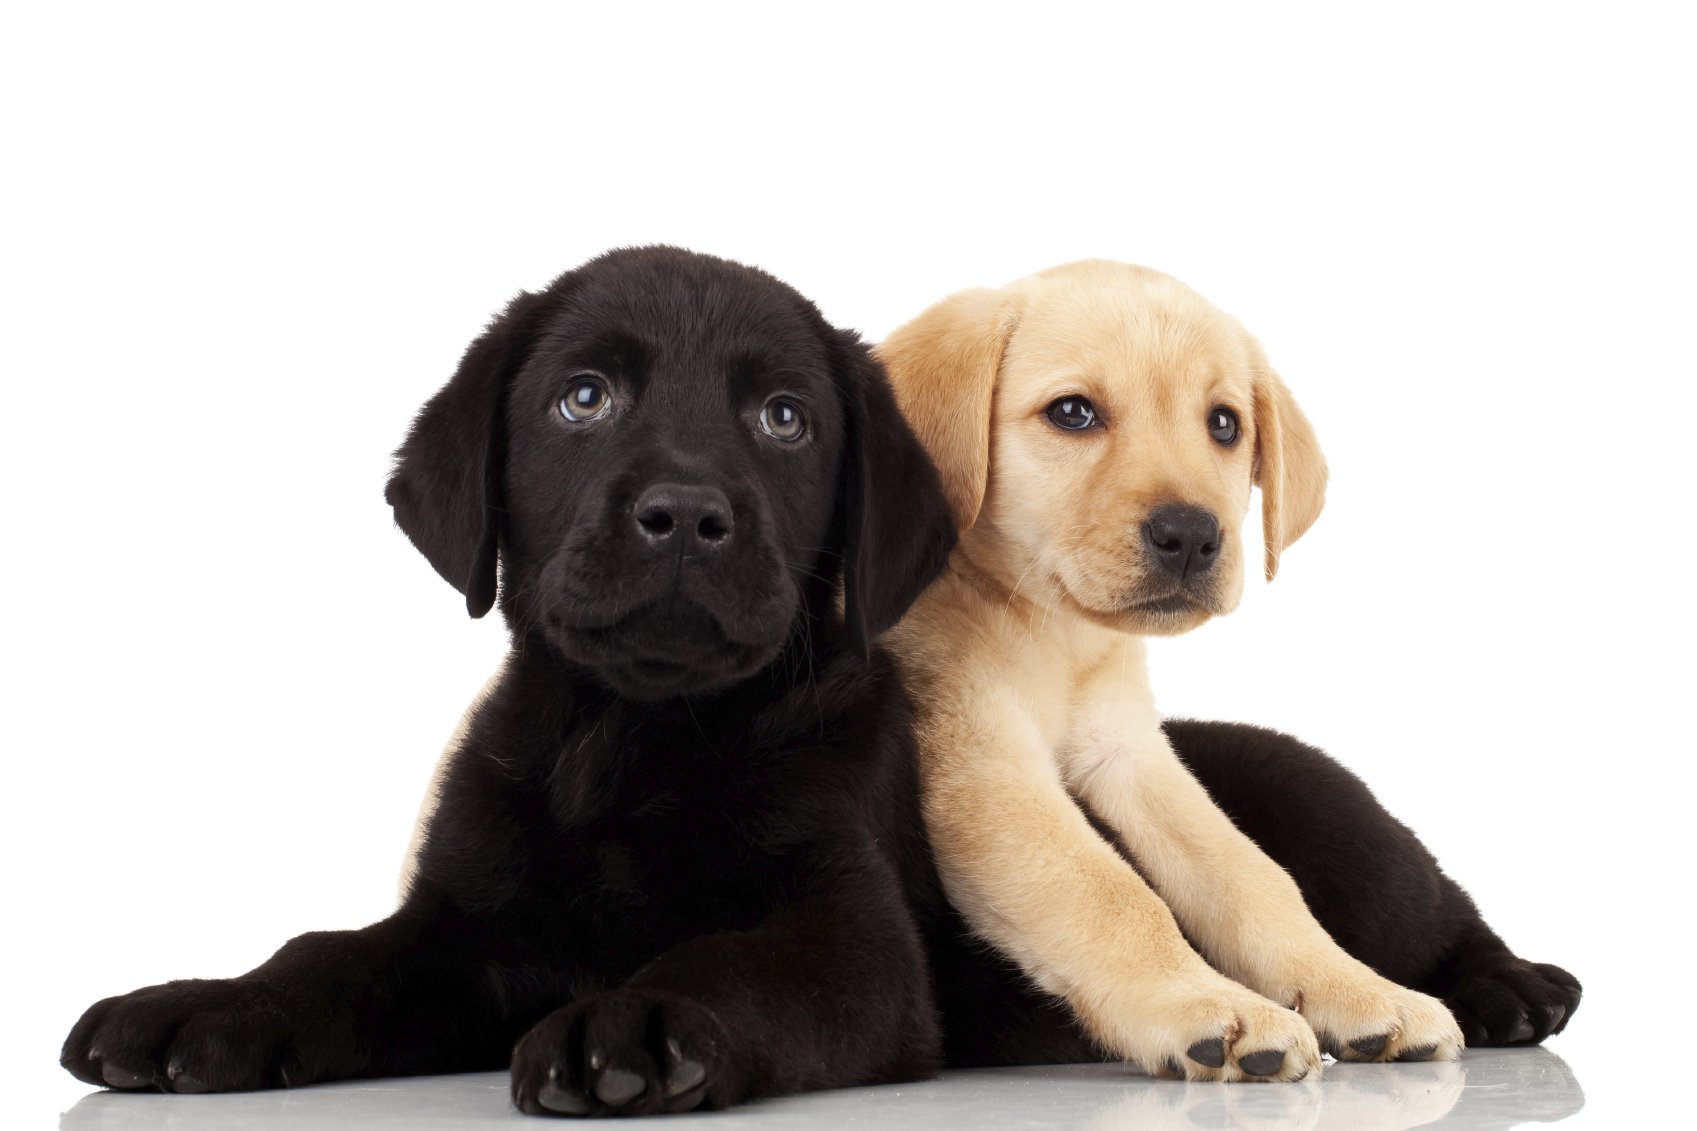 two cute labrador puppies - one with mouth open and one looking away